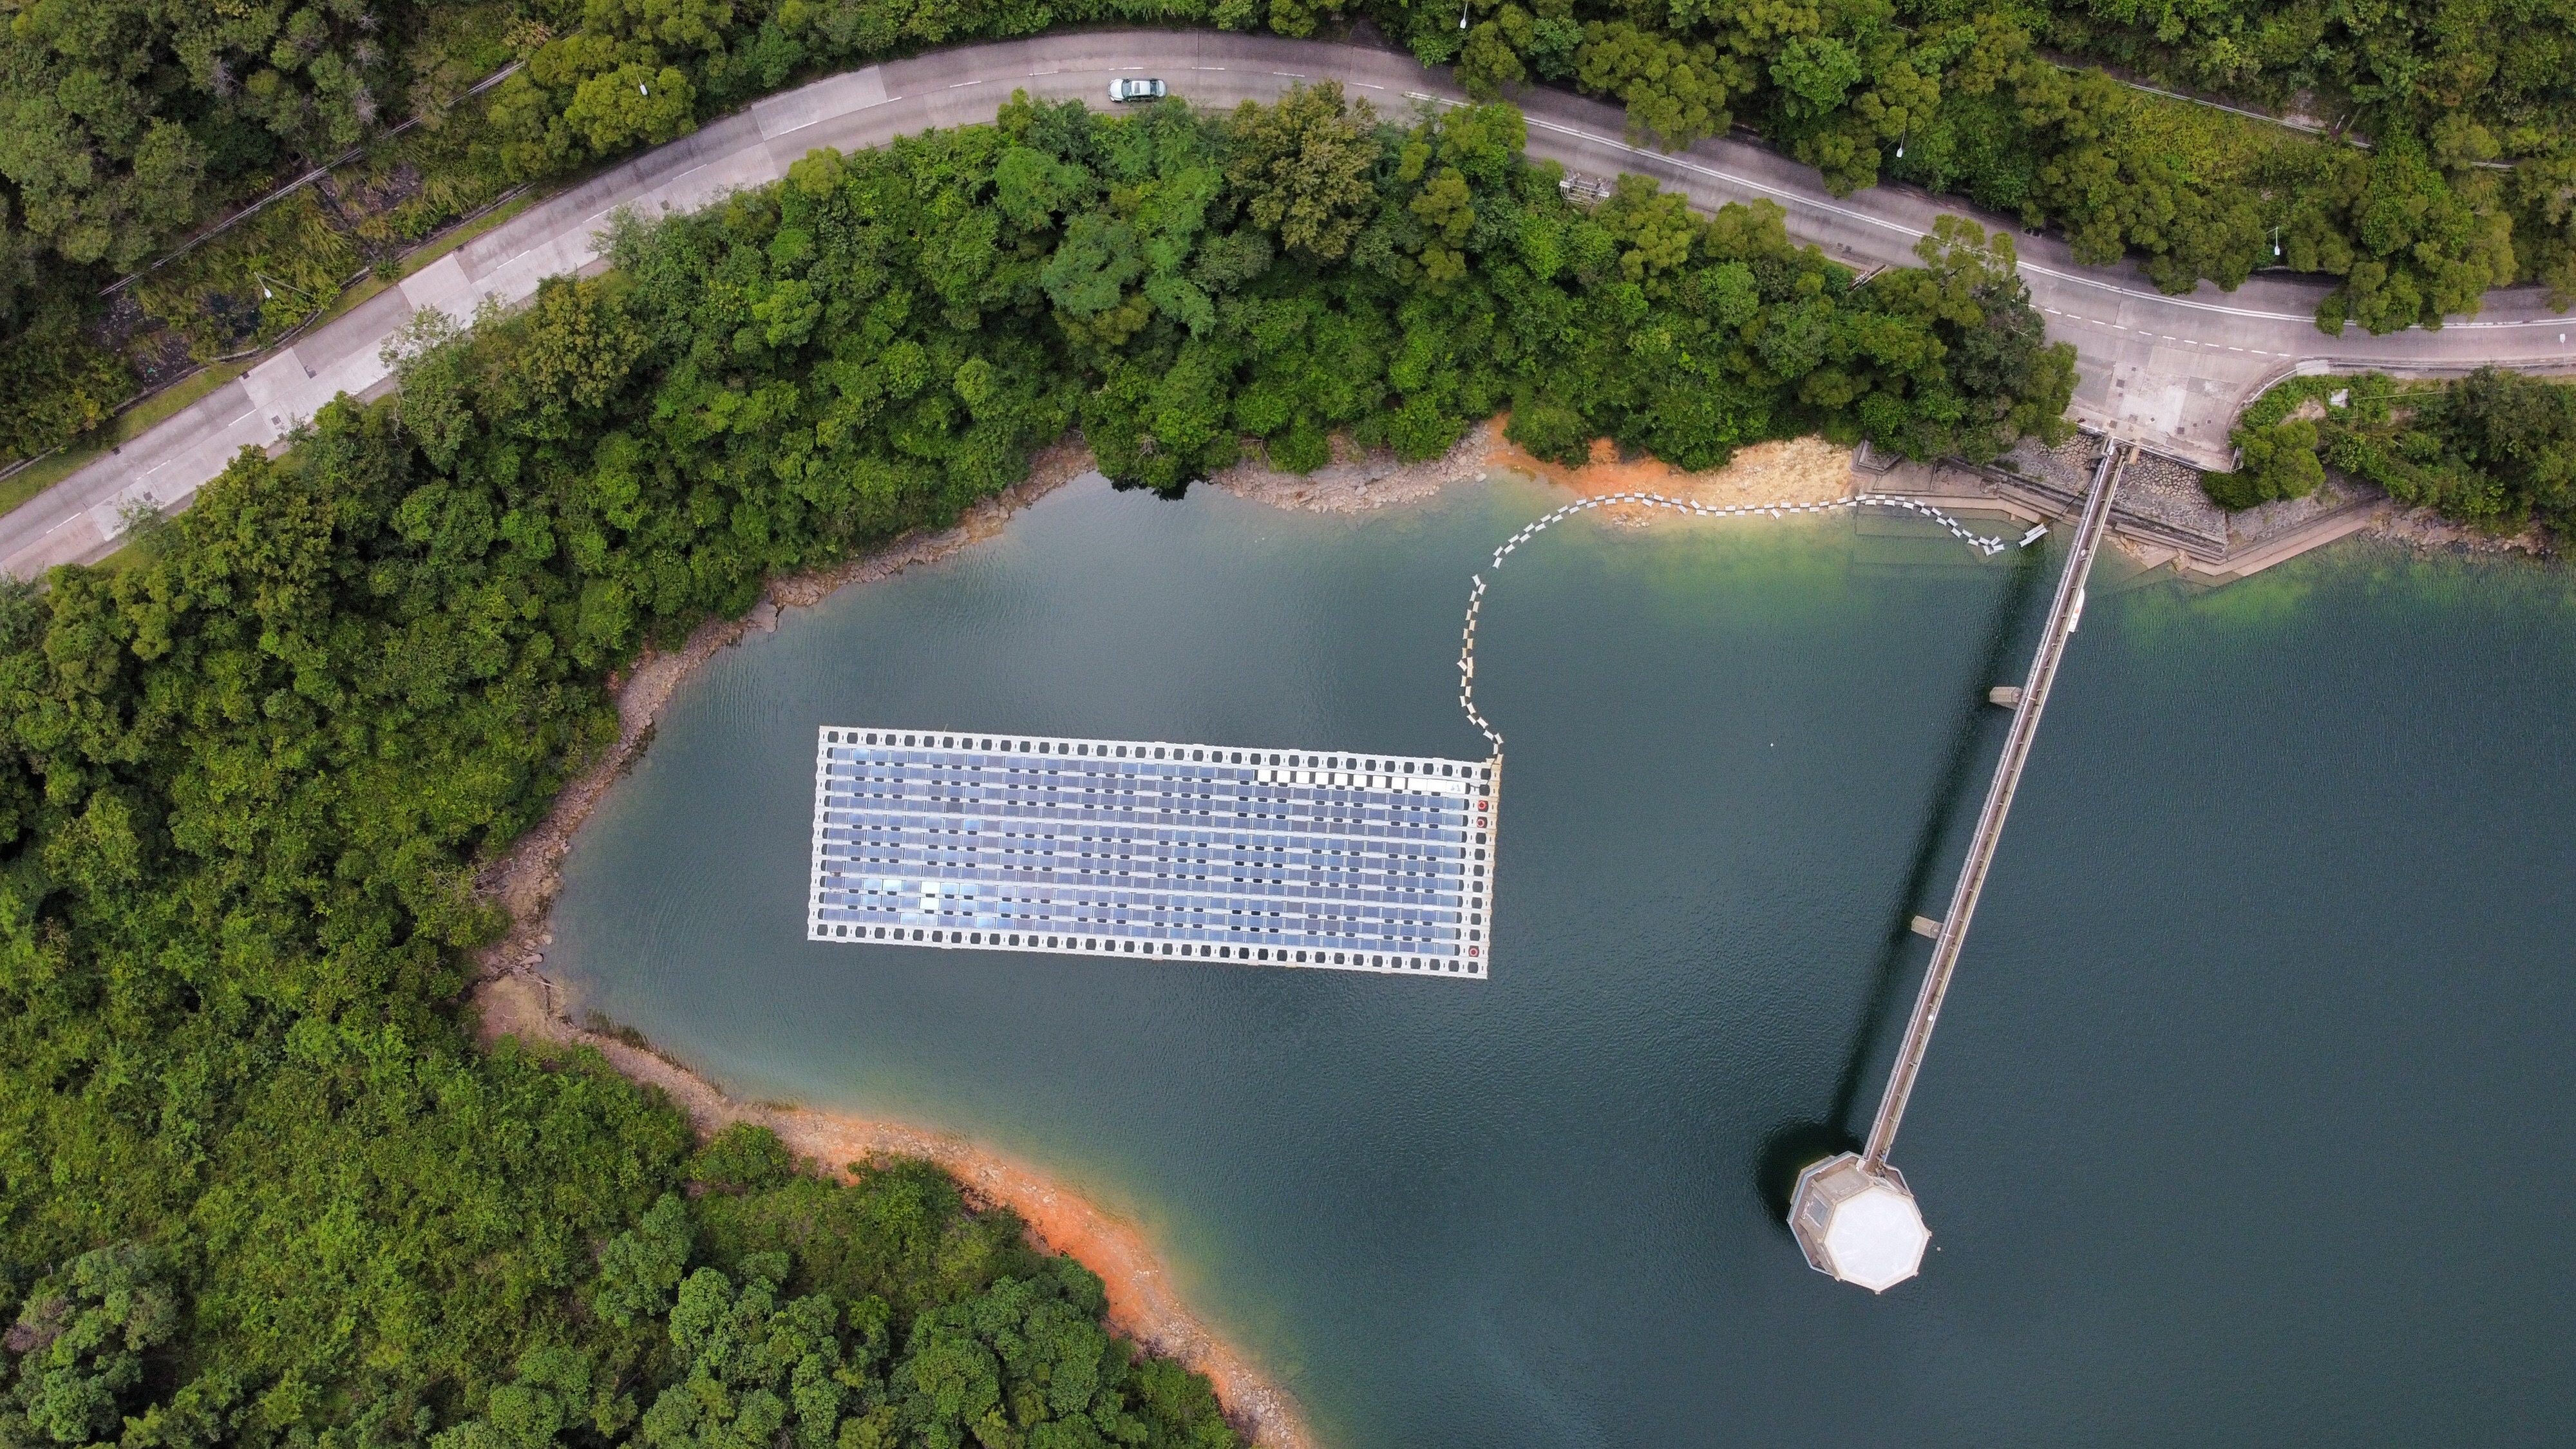 The Water Supplies Department has installed small floating solar farms at the Shek Pik and Plover Cove Reservoirs to collect data for similar large-scale projects in the future in Hong Kong. Photo: Martin Chan